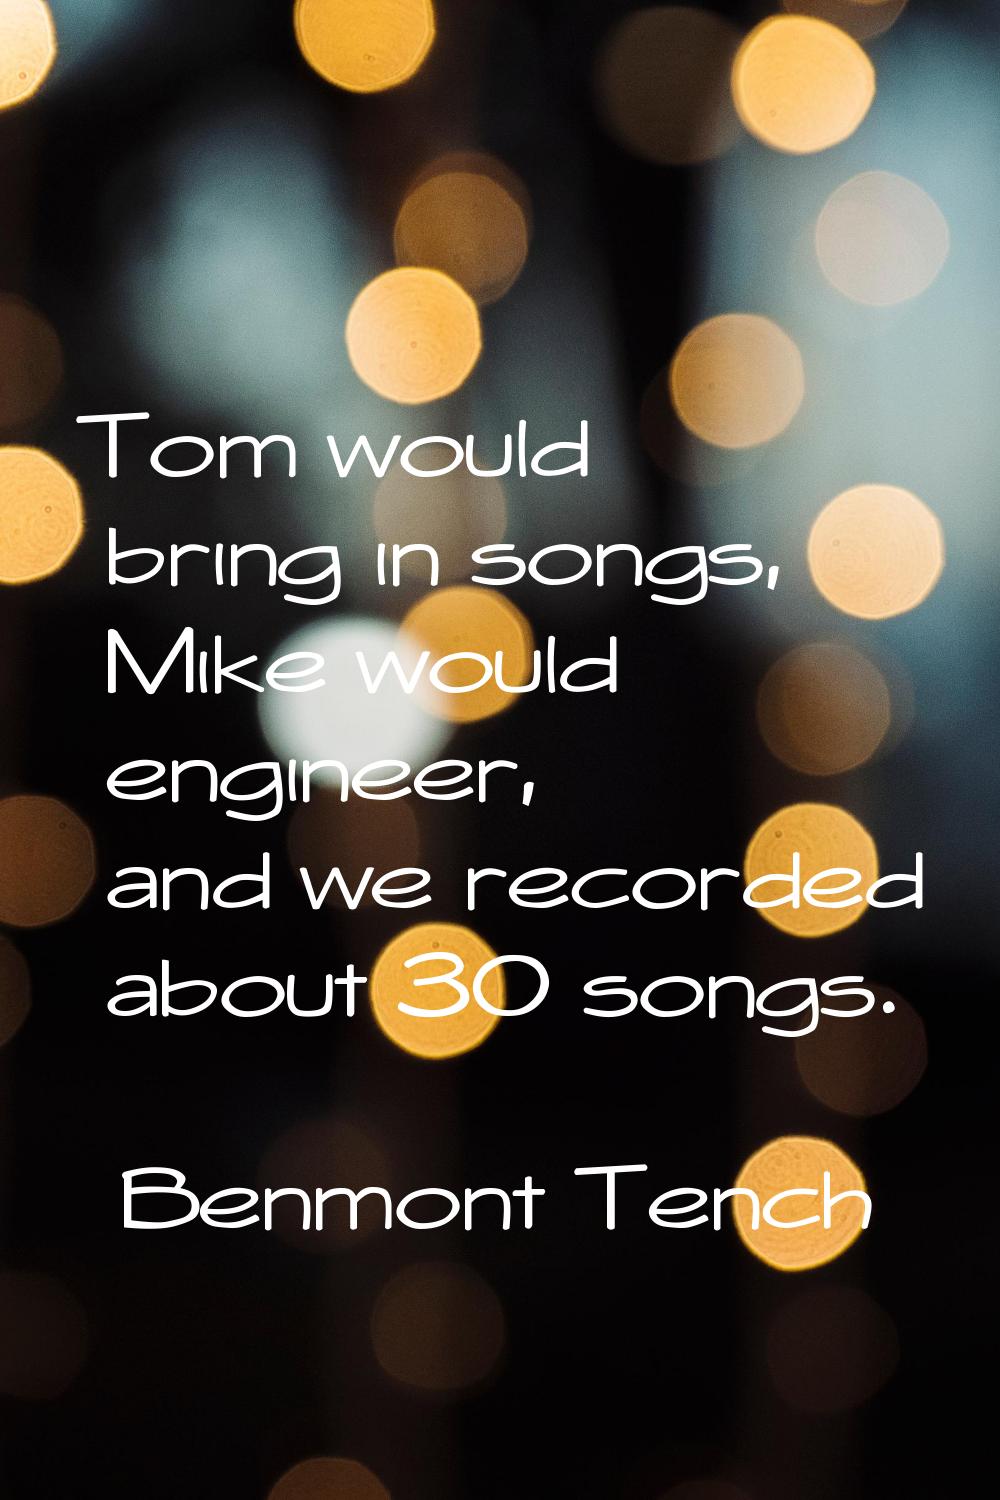 Tom would bring in songs, Mike would engineer, and we recorded about 30 songs.